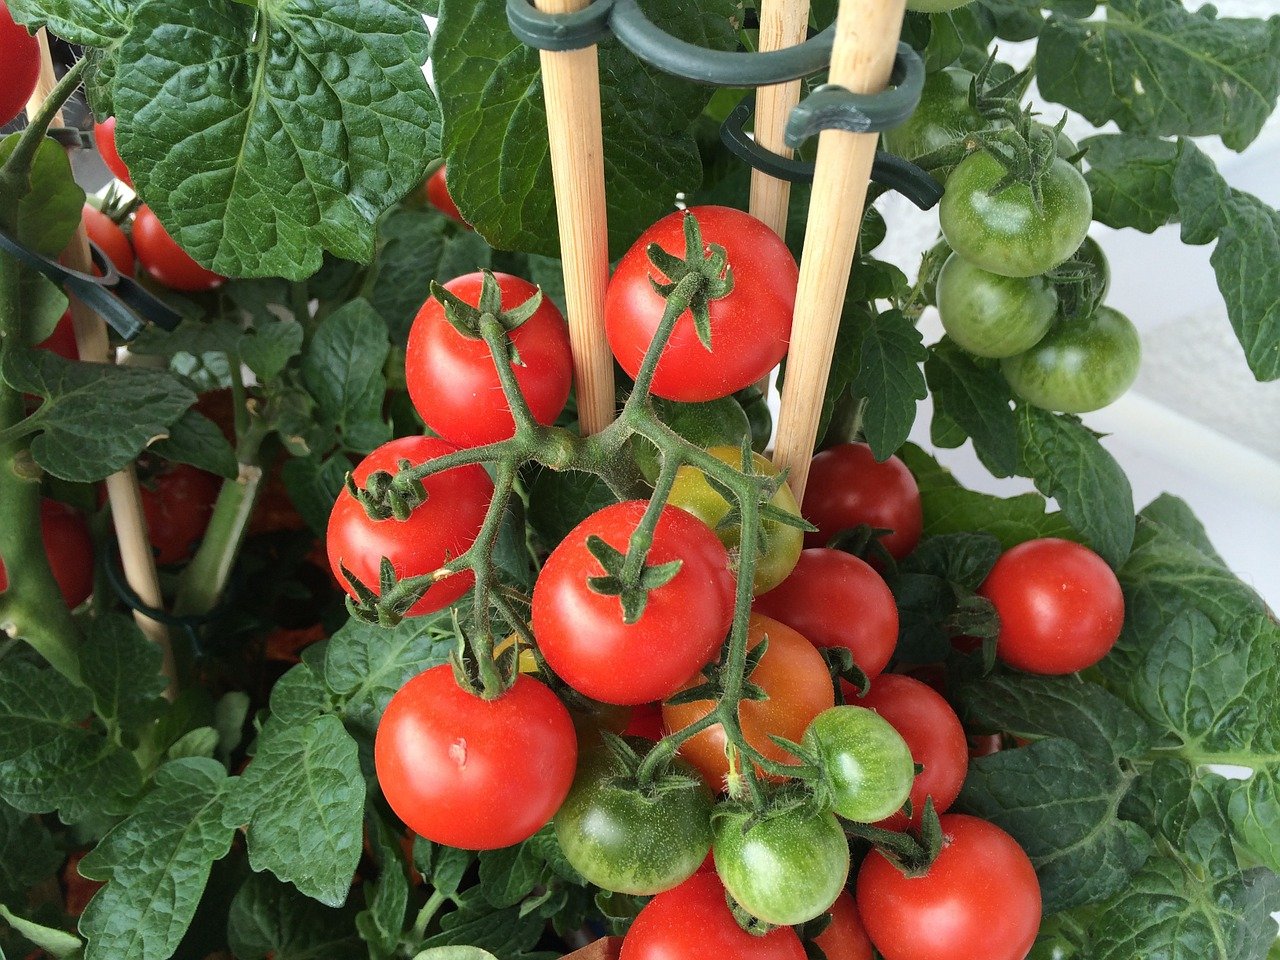 A photo of homegrown tomatoes growing.